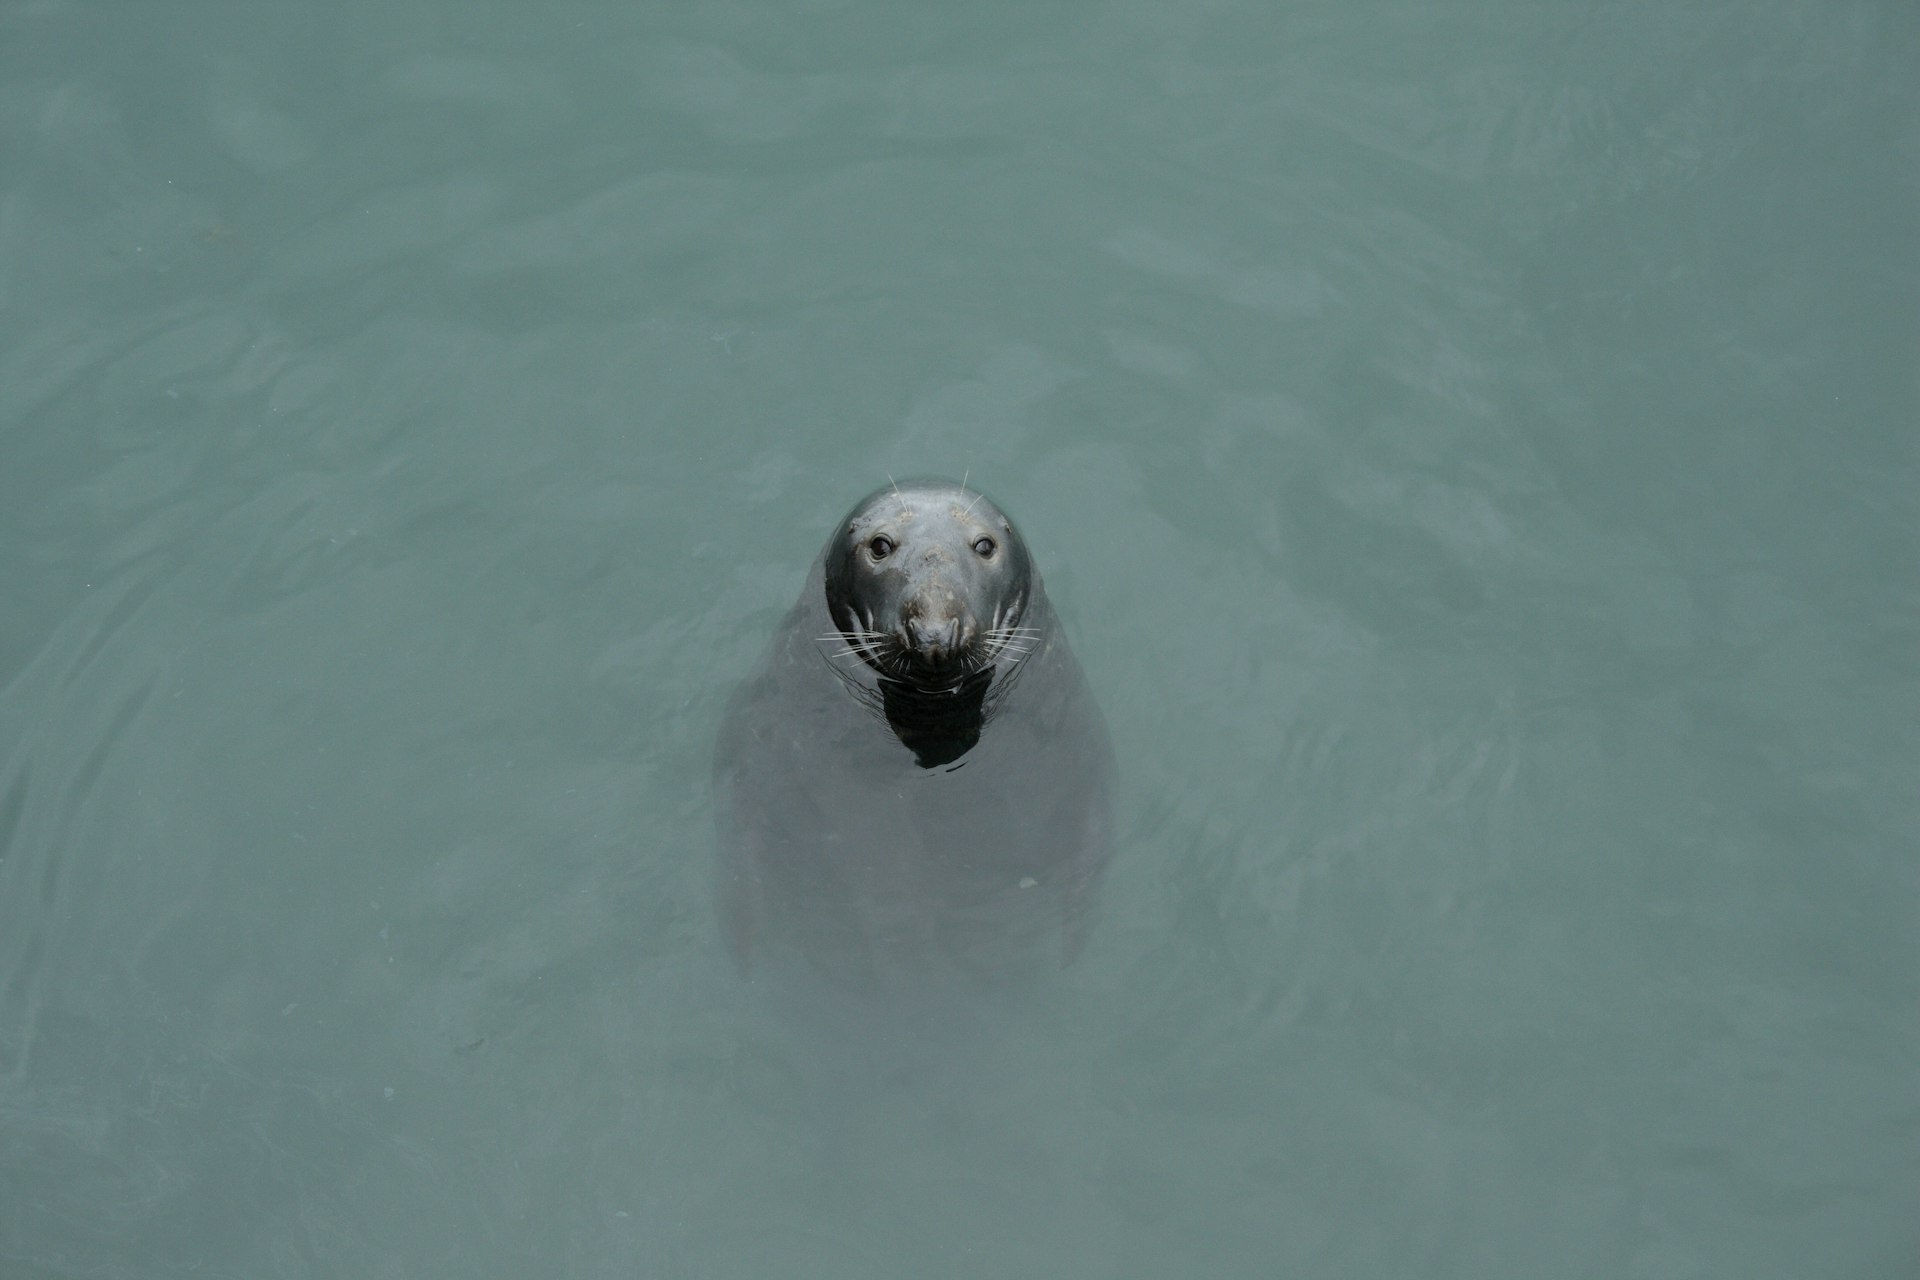 A seal in the water off of Skerries, County Dublin, Ireland